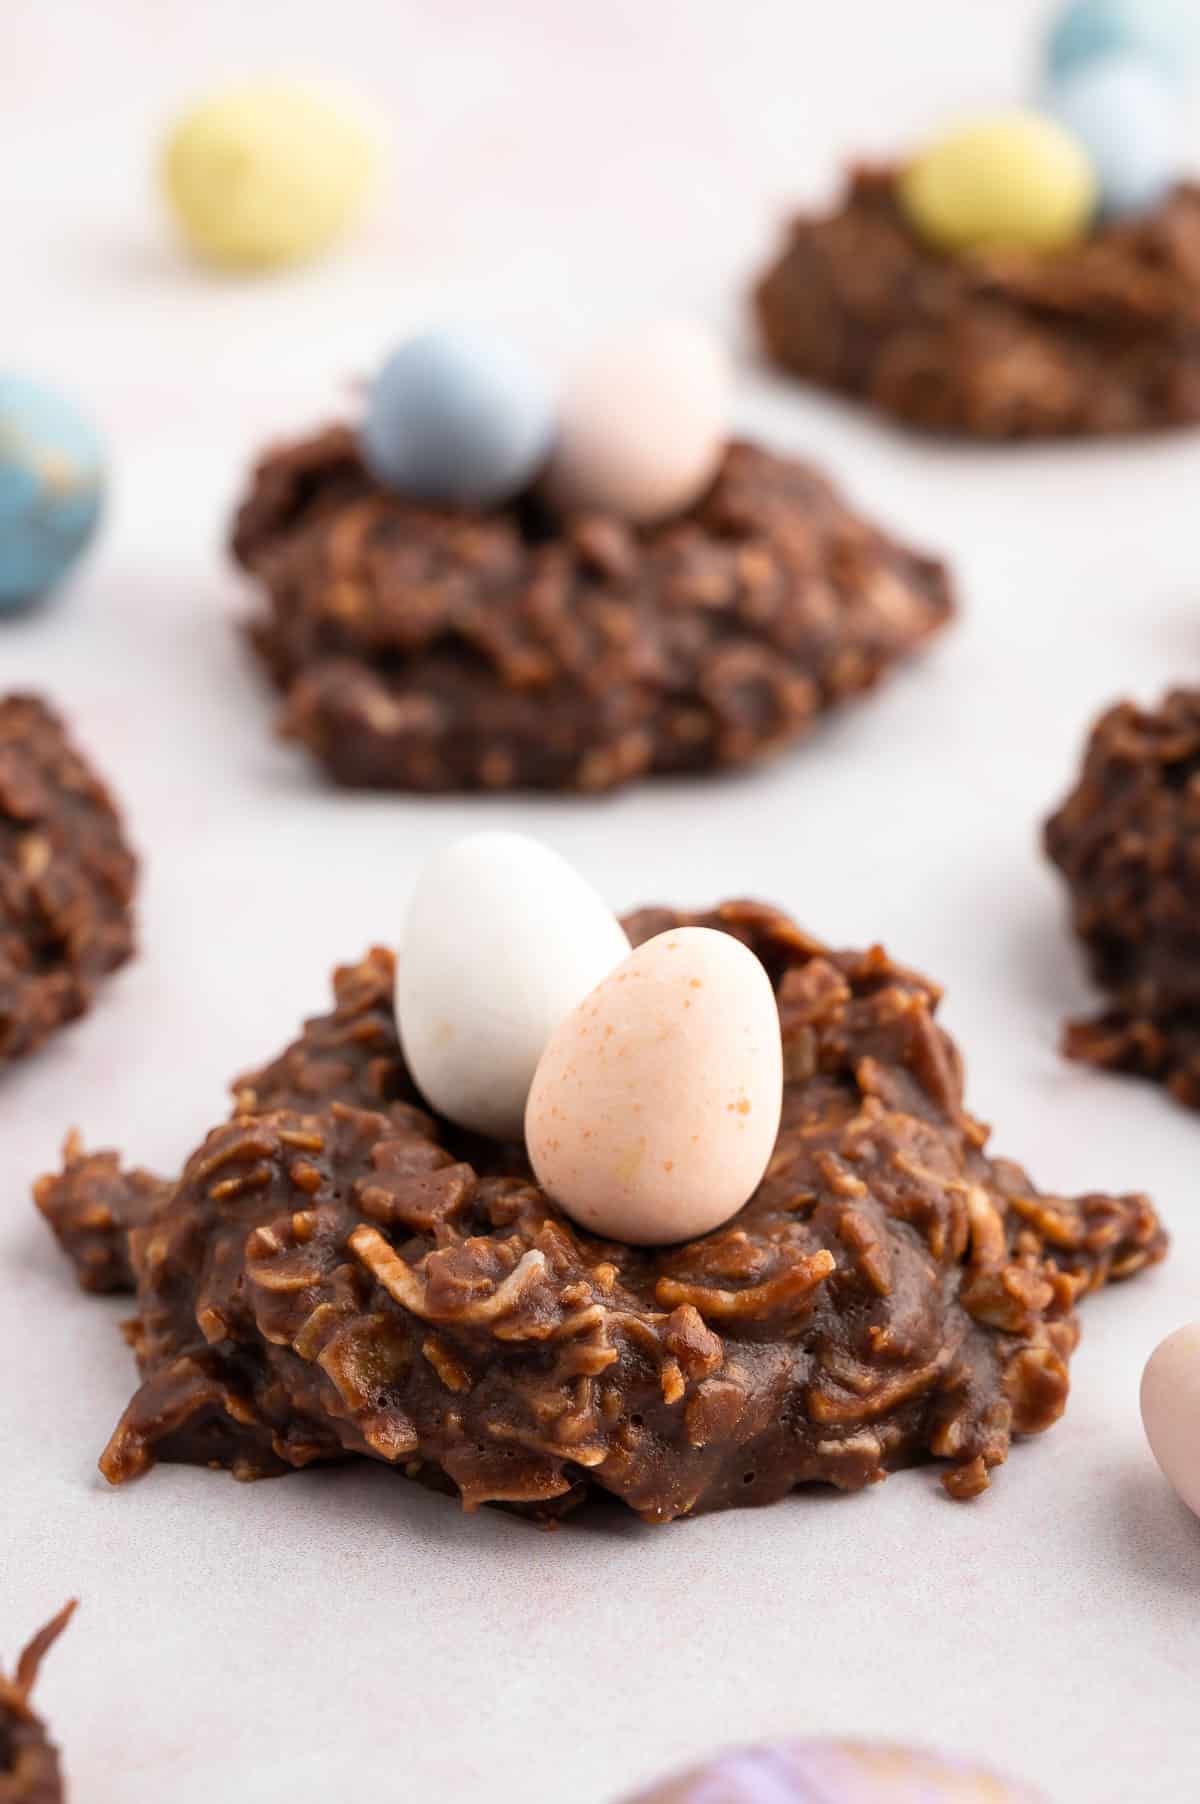 no bake birds nest cookies (no bake oatmeal cookies topped with candy easter eggs) on parchment paper